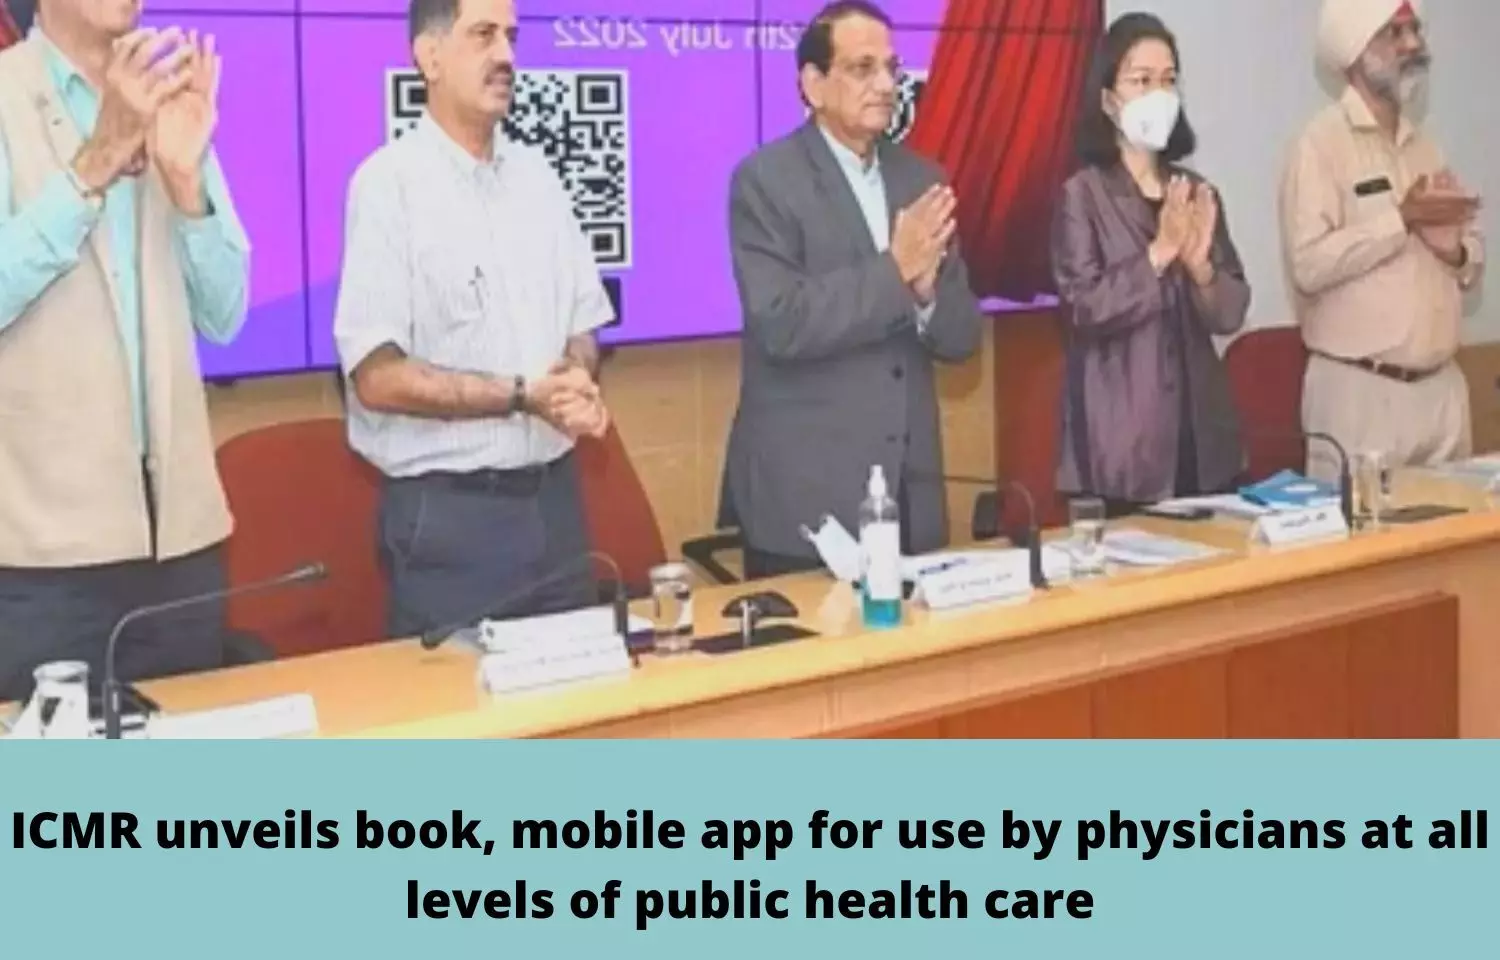 ICMR unveils book, mobile app for use by physicians at all levels of public health care